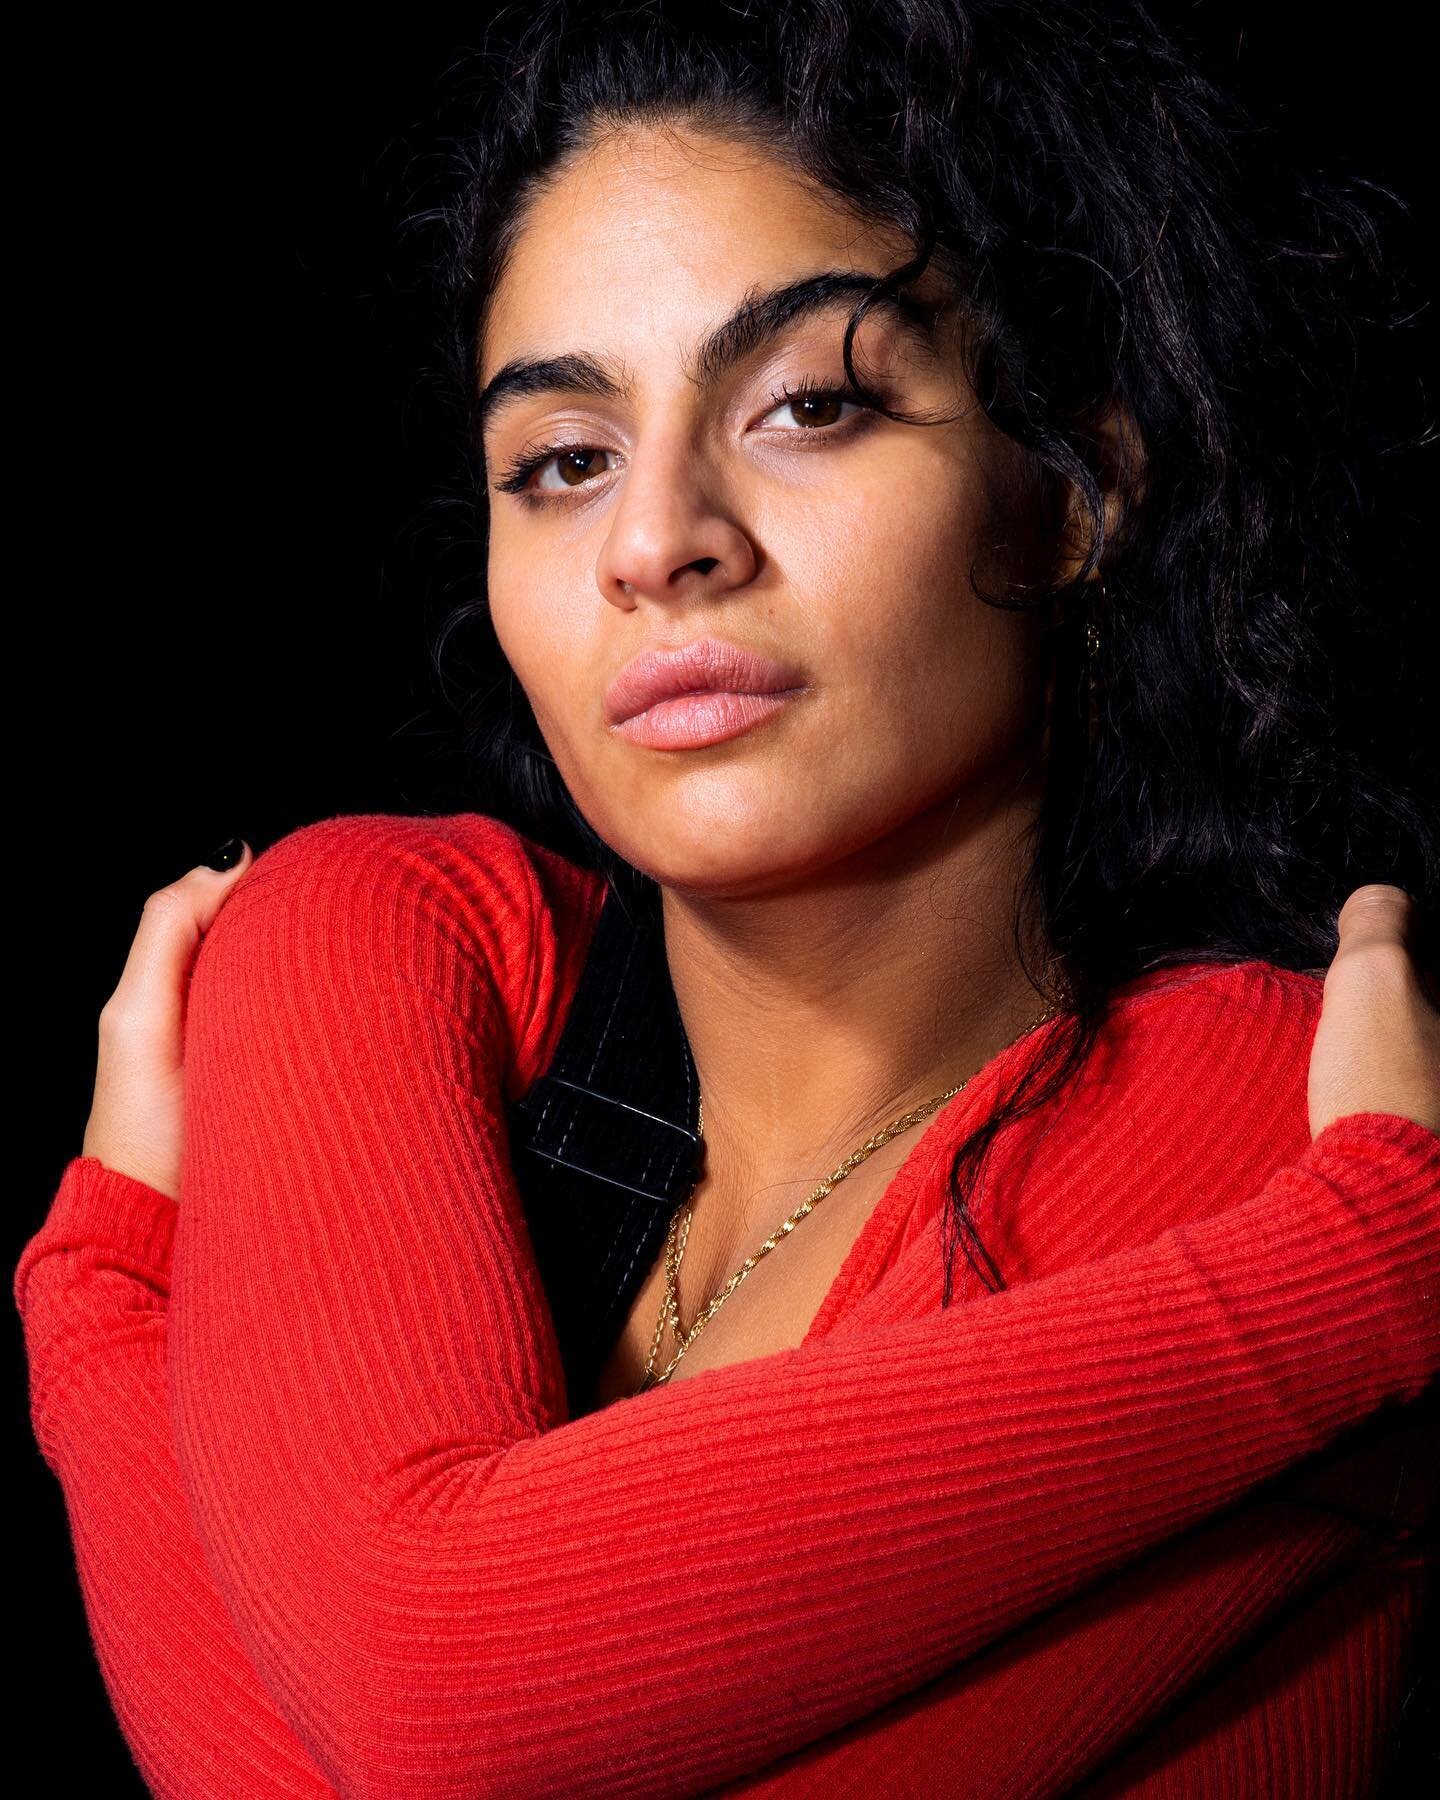 From a wonderful and mellow shoot with the talented and beautiful @jessiereyez. I loved the energy of this shoot: strong, confident, quiet and real. Thank you Jessie! 📸
Shot by me February 7th, 2020 for @fastcompany&rsquo;s #FCCreativeConversation p